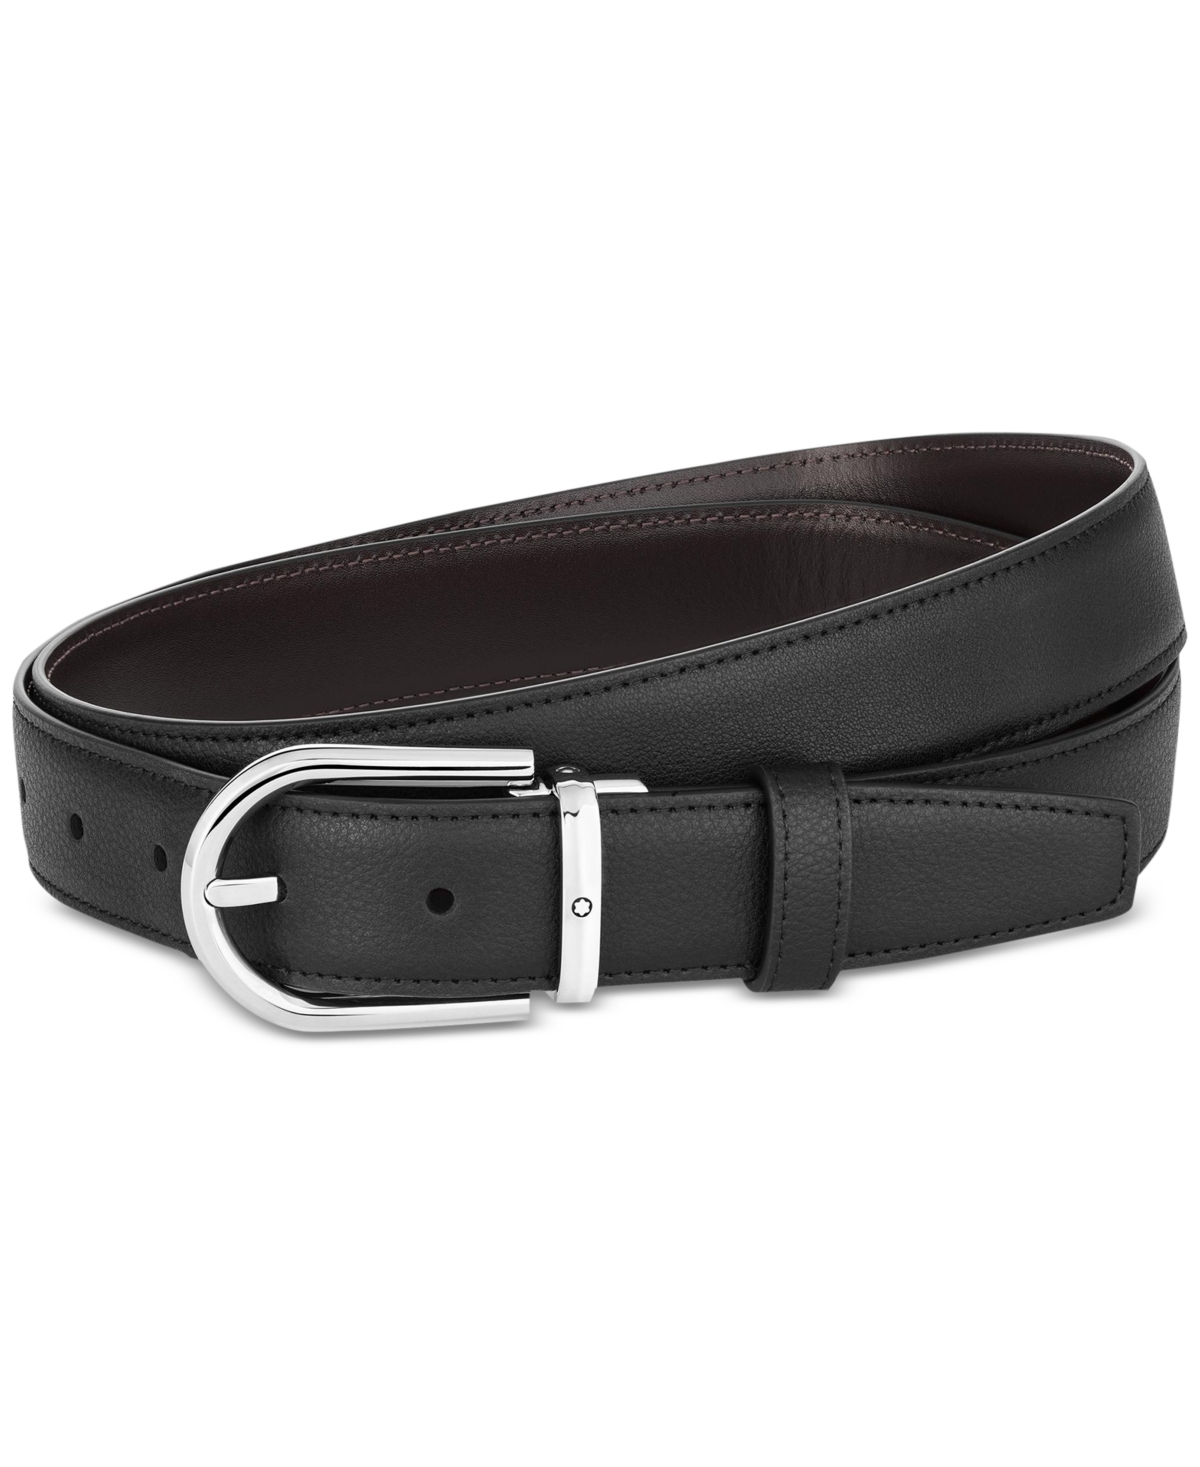 Montblanc Men's Horseshoe Shiny Stainless Steel Reversible Leather Belt In Black Brown